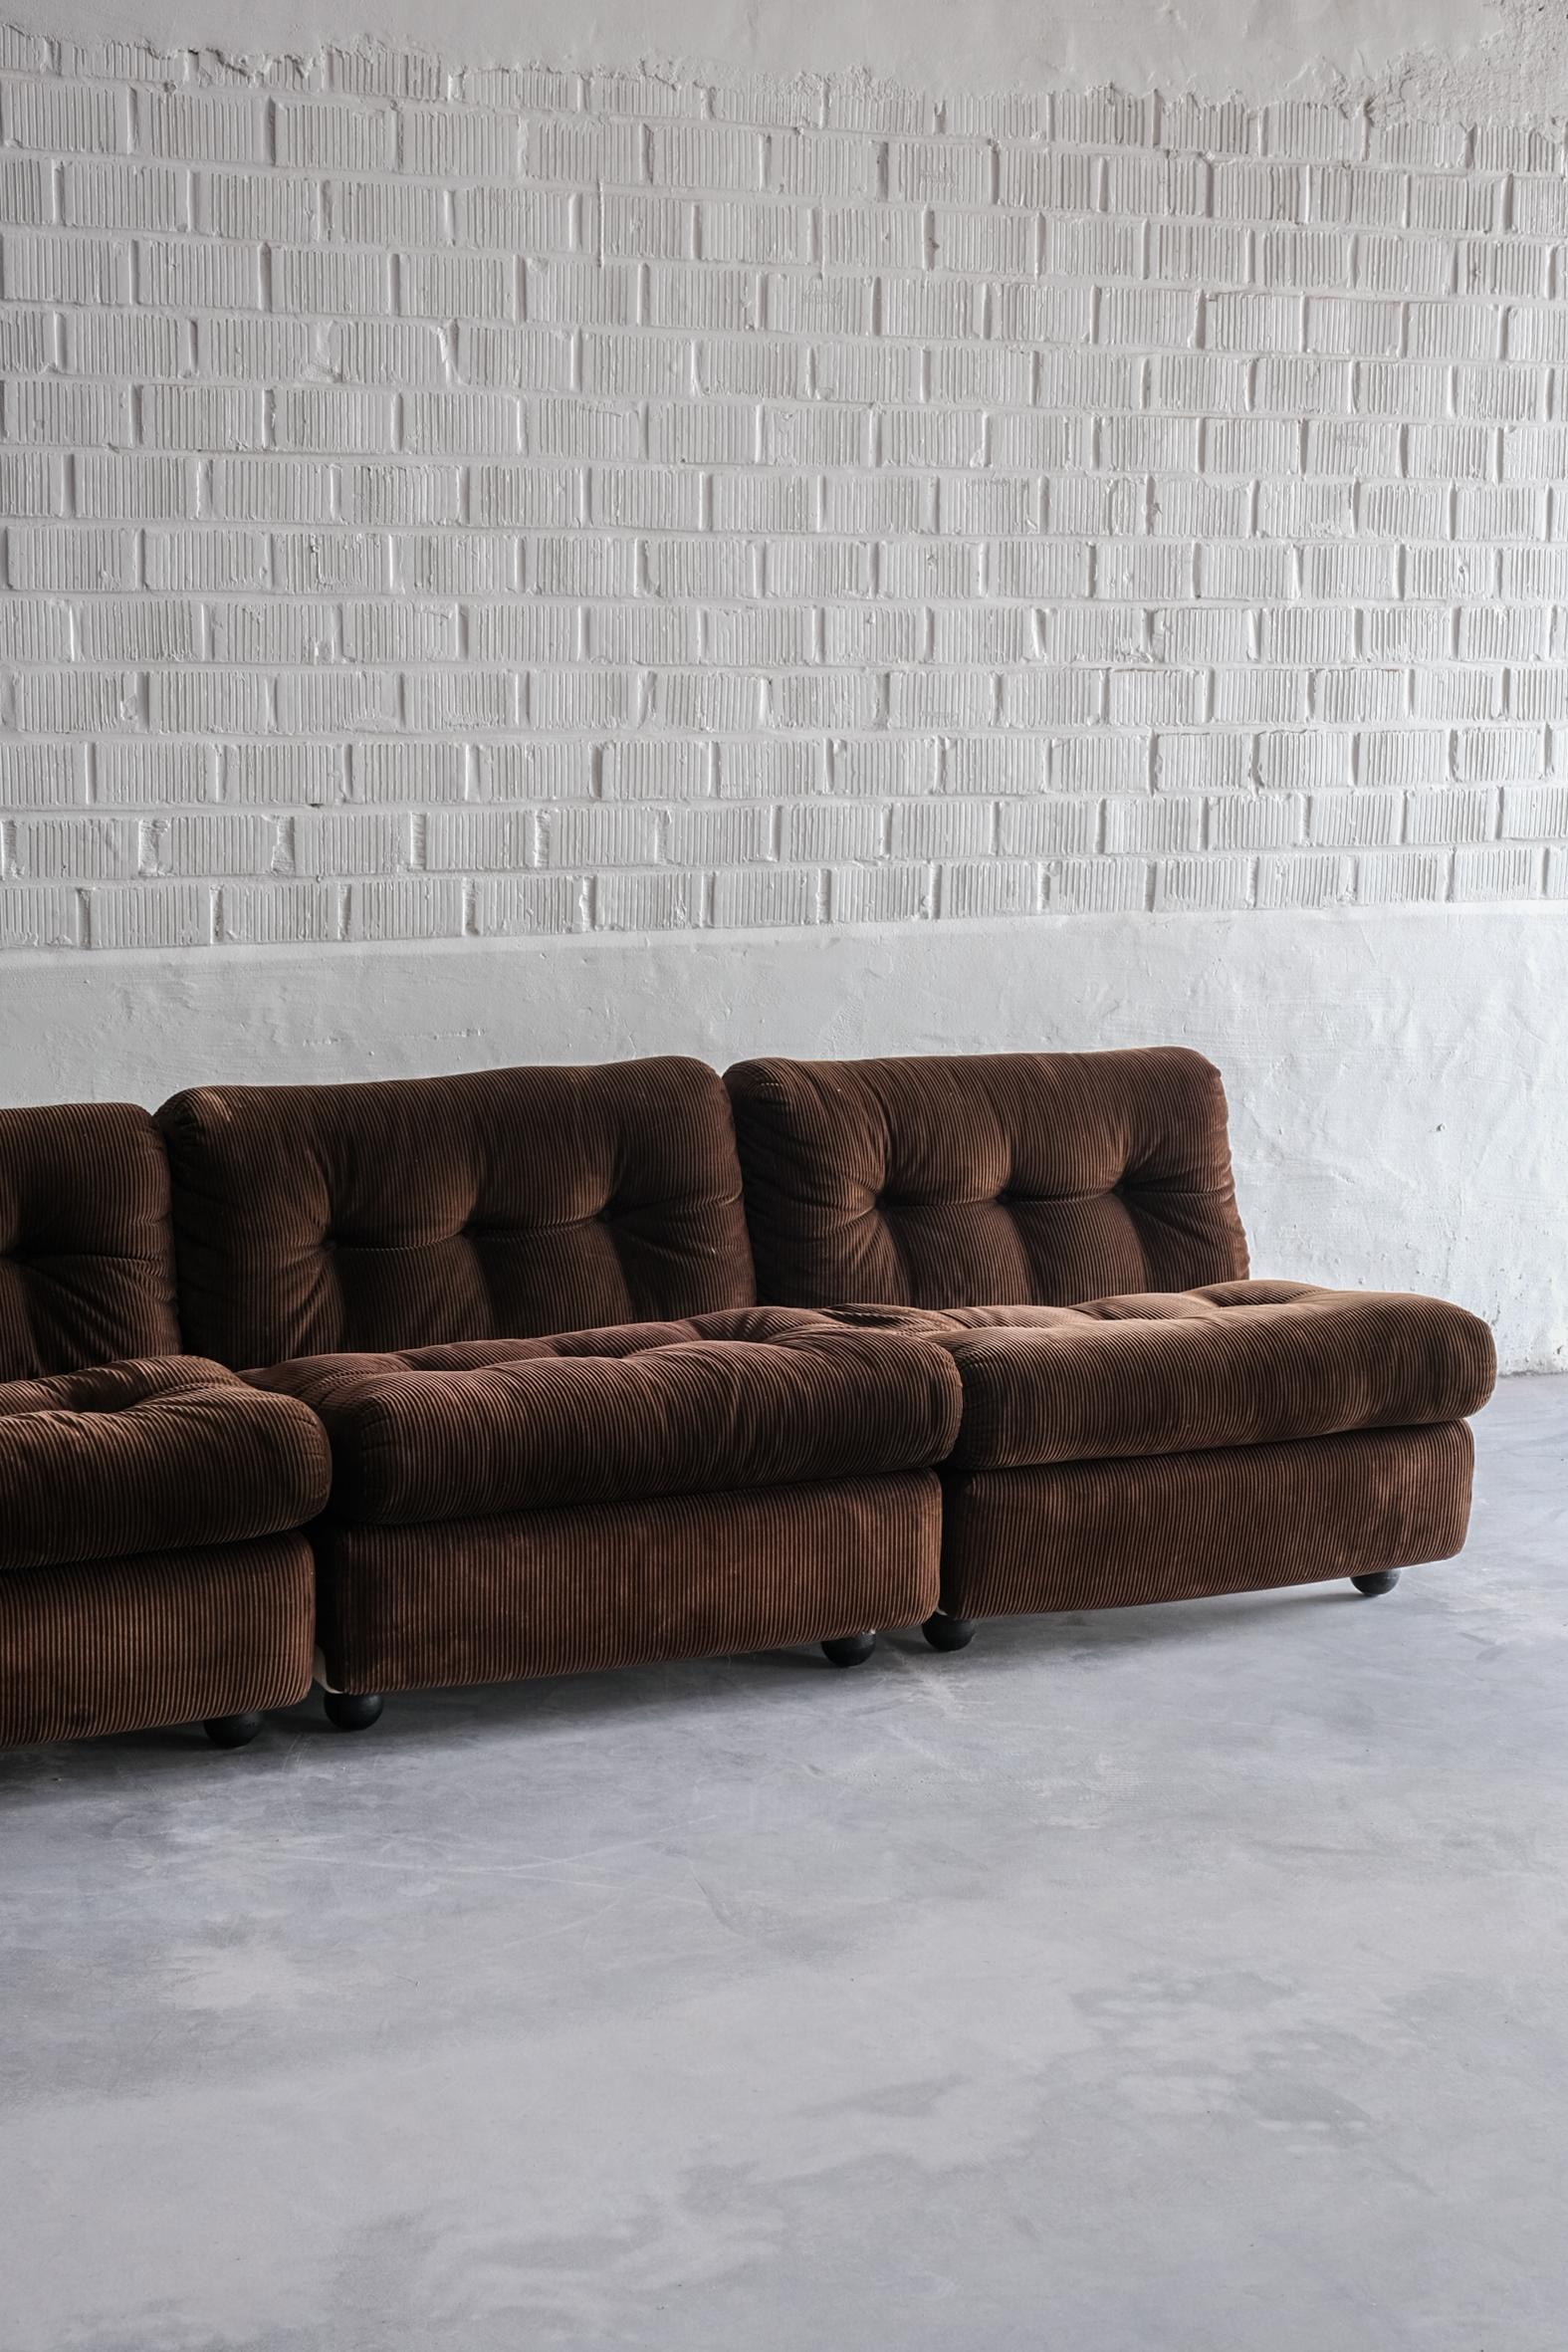 This pieces is in original conditions and has always been placed in a gallery. The sofa was not used on daily basis thus the seating quality is still very good for a sofa of the 70ties. 

The orginal fabric is untouched and in good condition. The